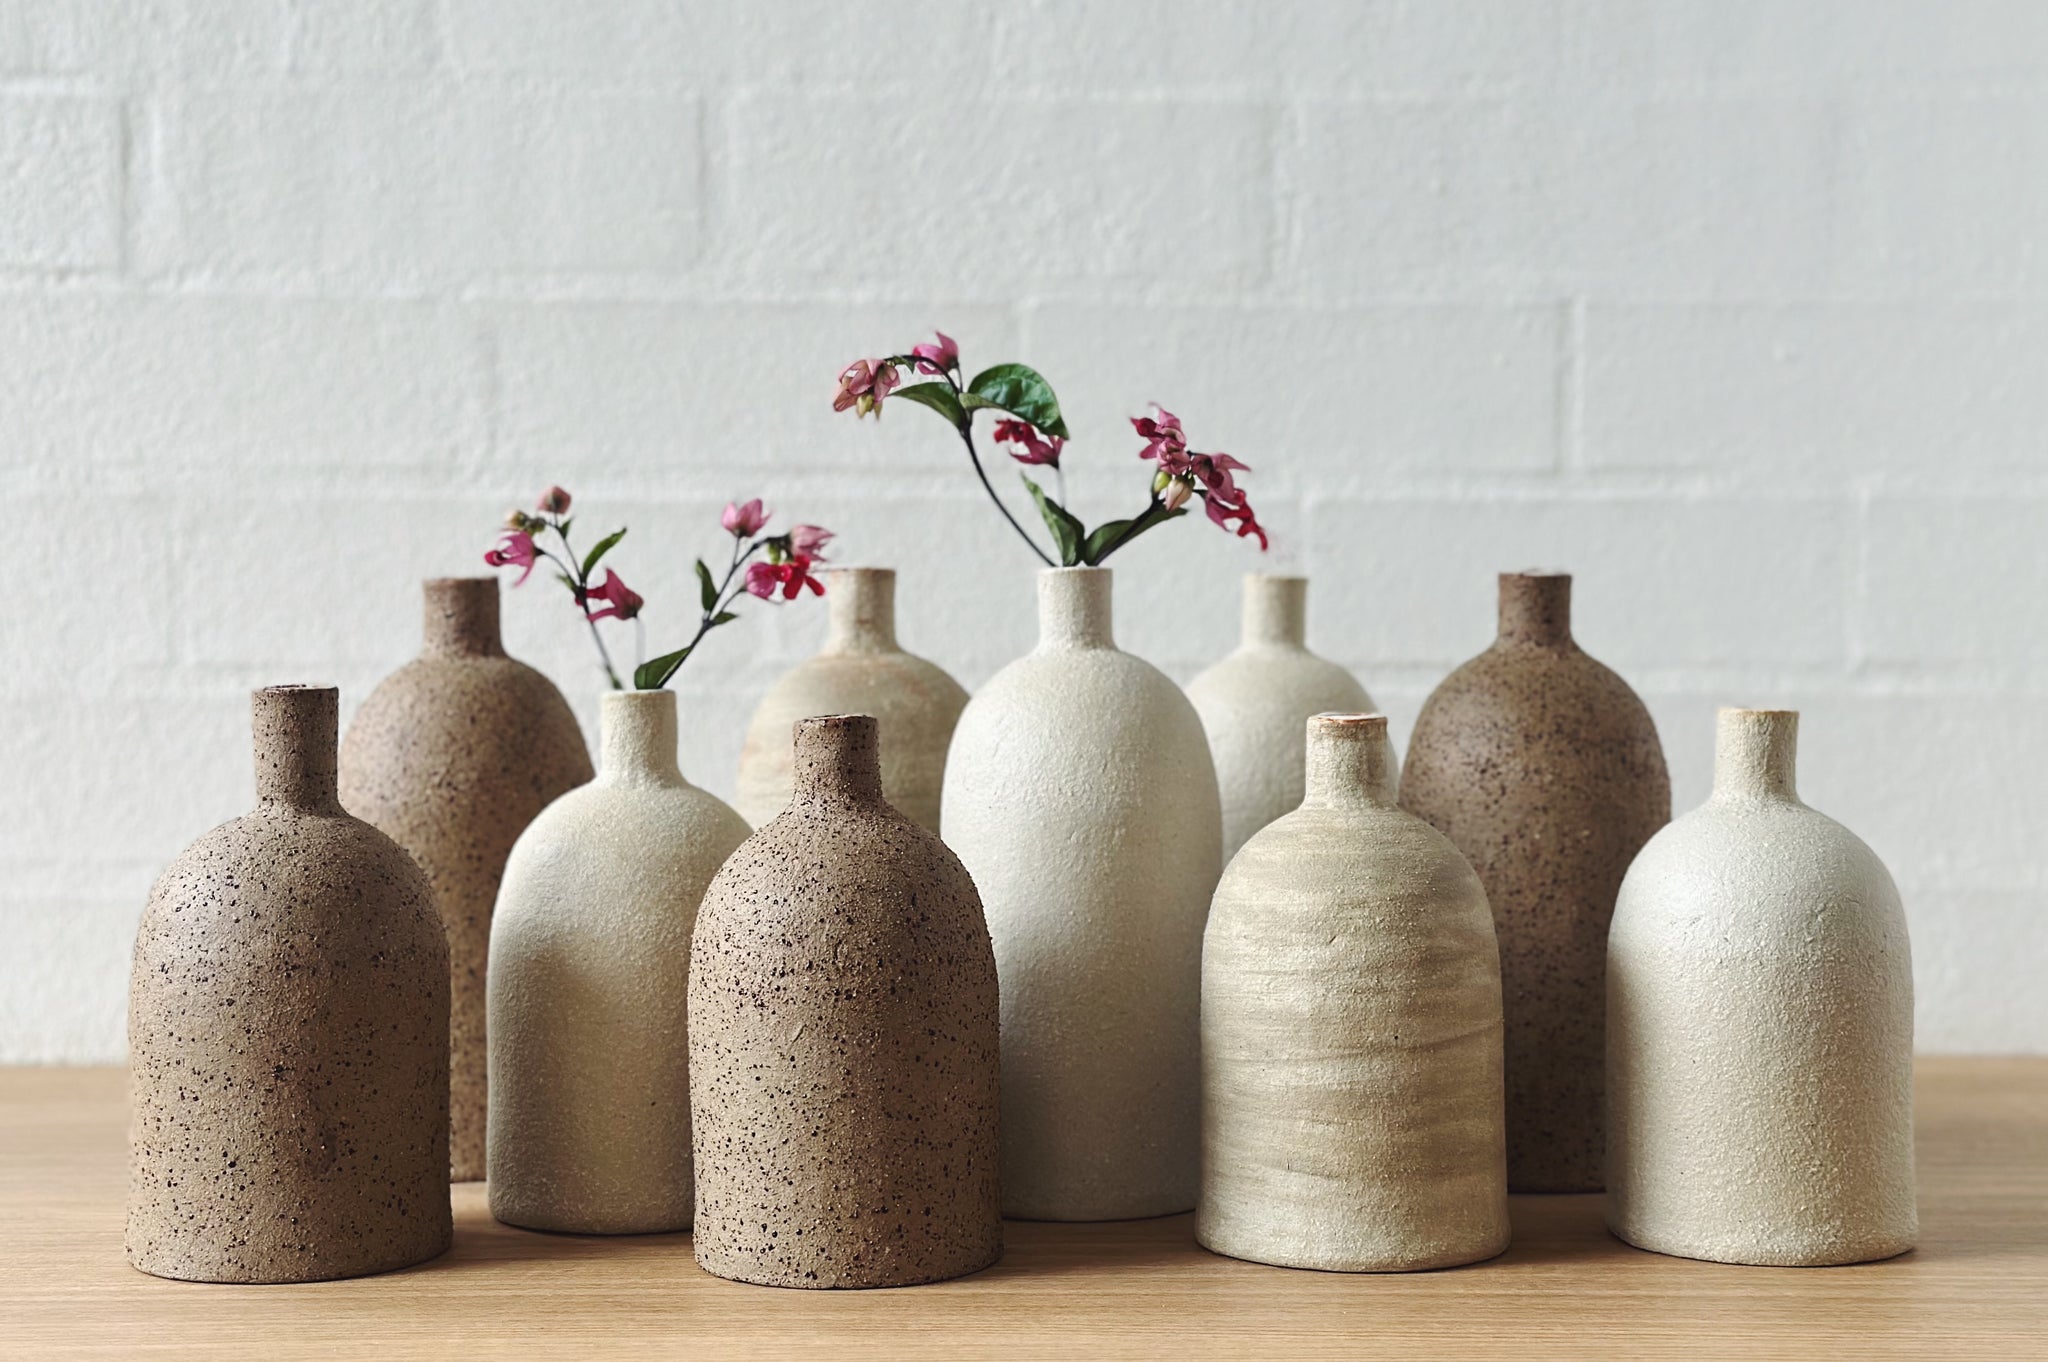 A collection of handmade ceramics bottles in earthy tones